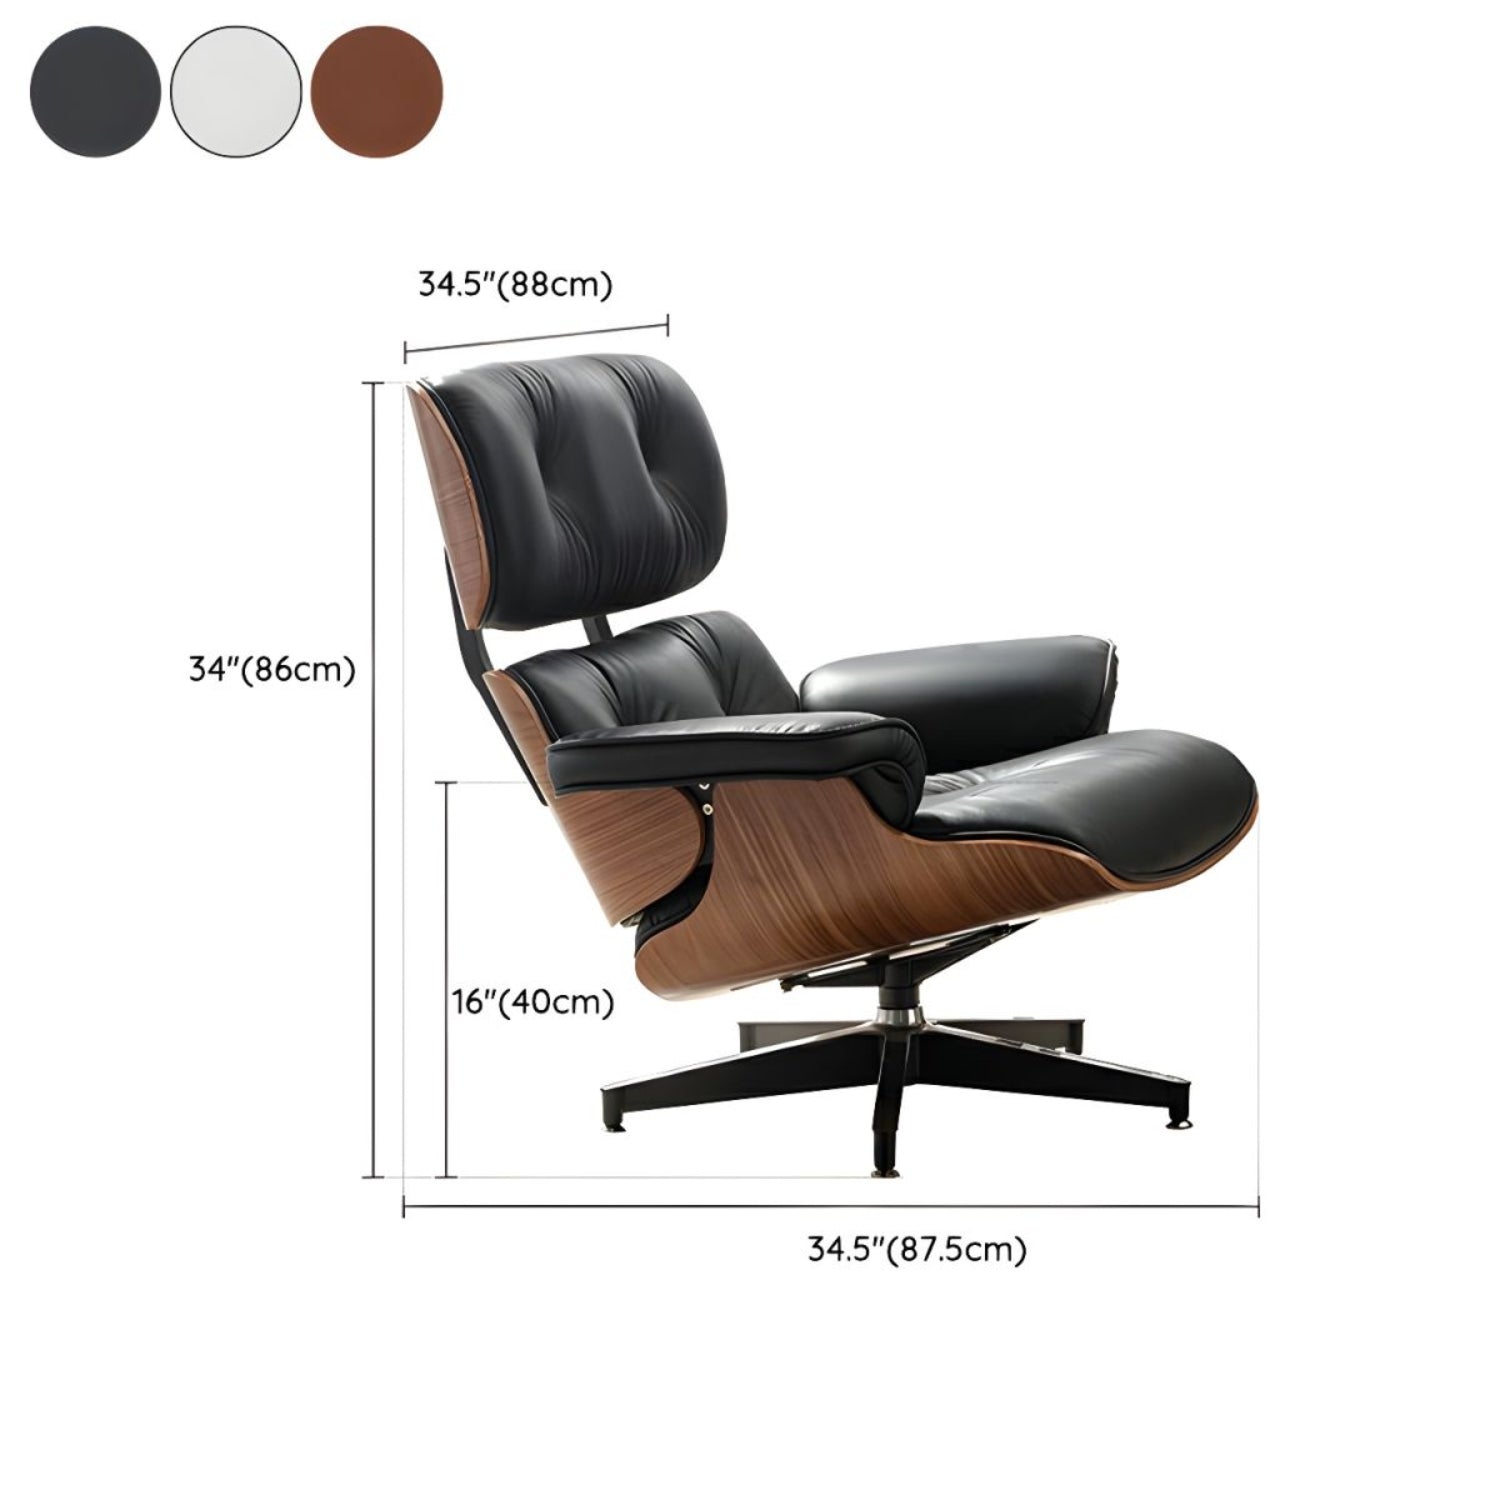 Image of Eames lounge chair displaying measurements, highlighting its elegant style and accurate sizing.